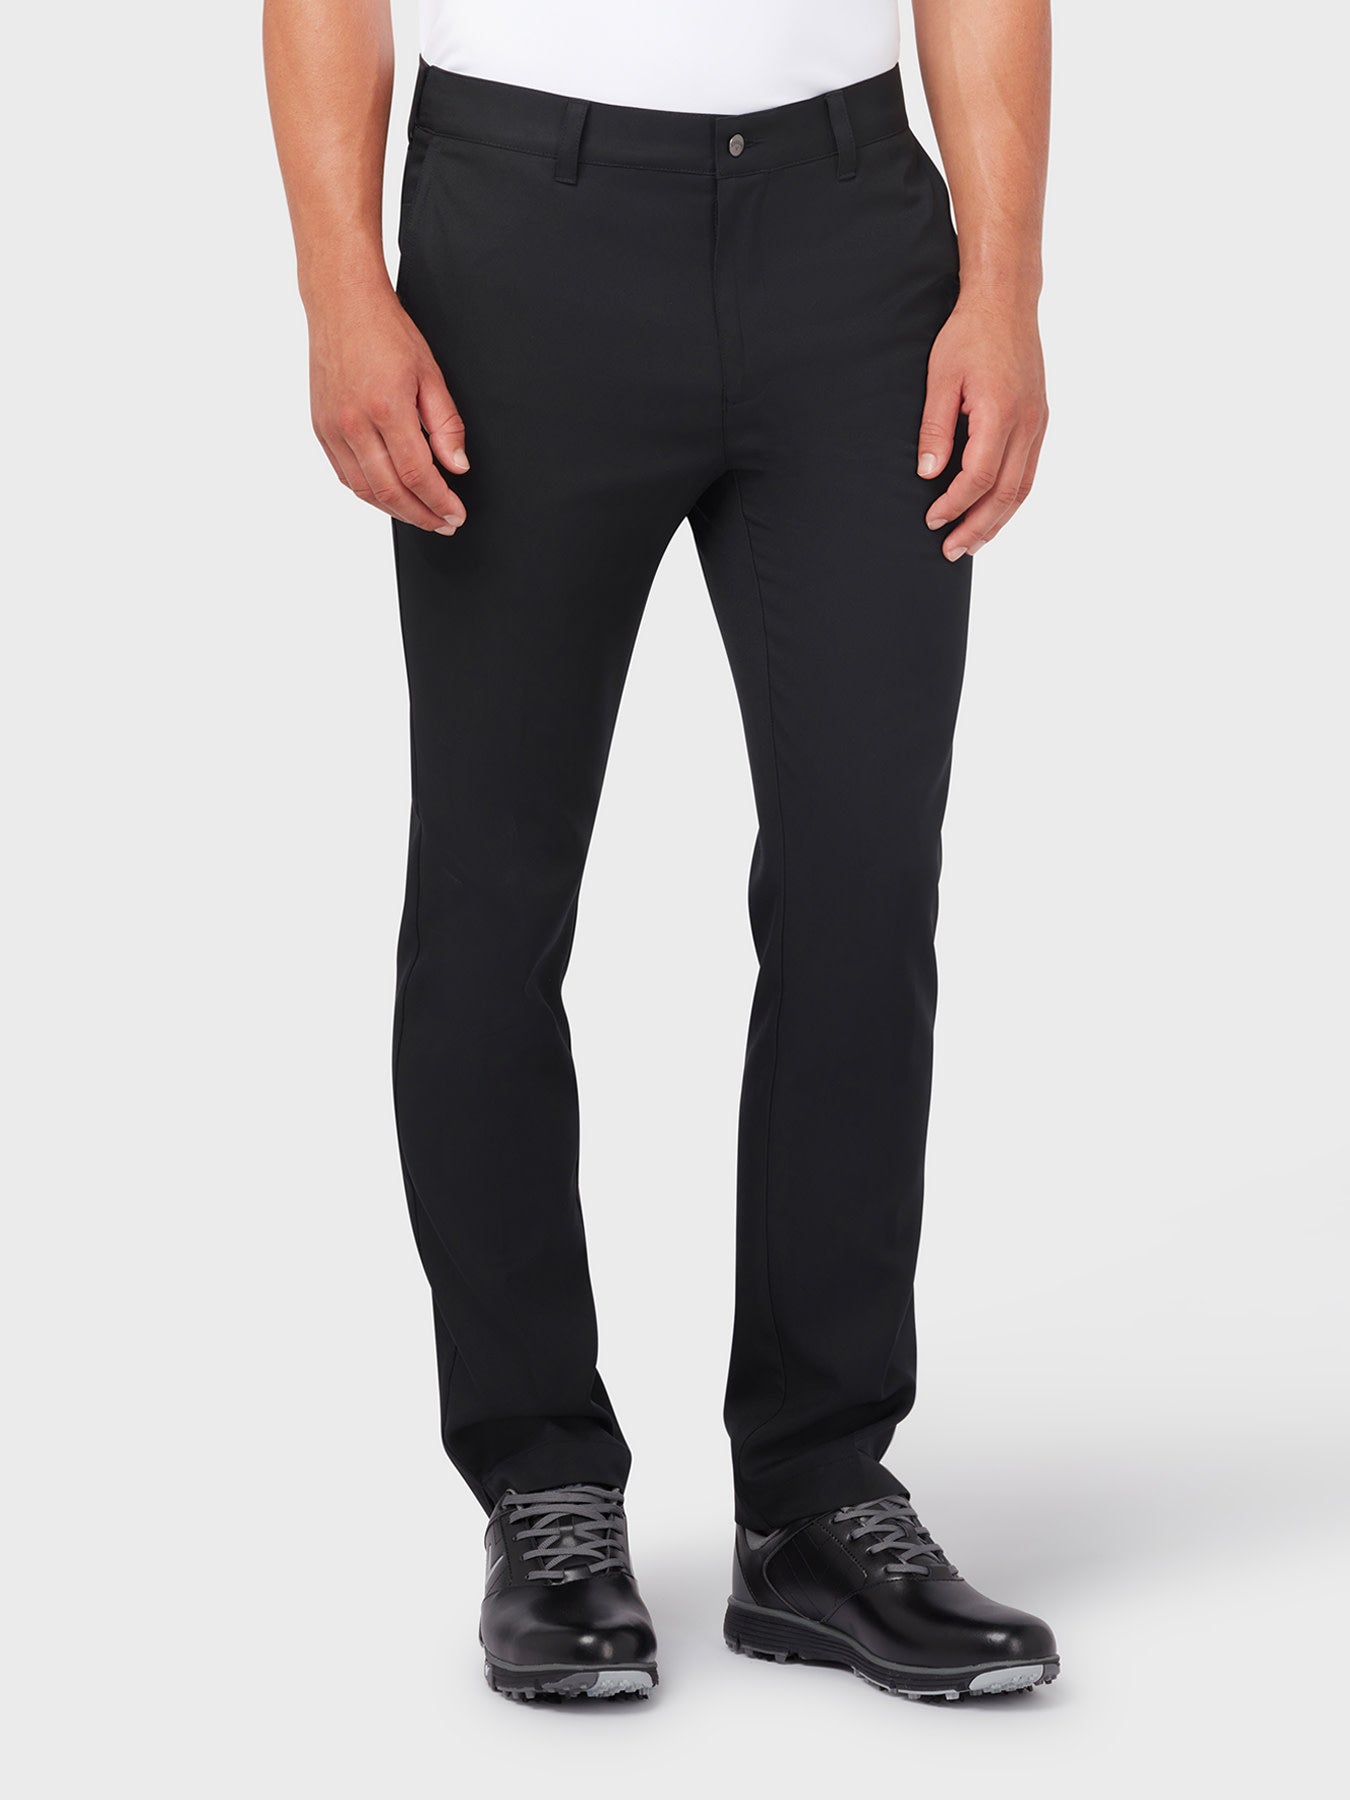 View X Series Tech Trousers In Caviar information